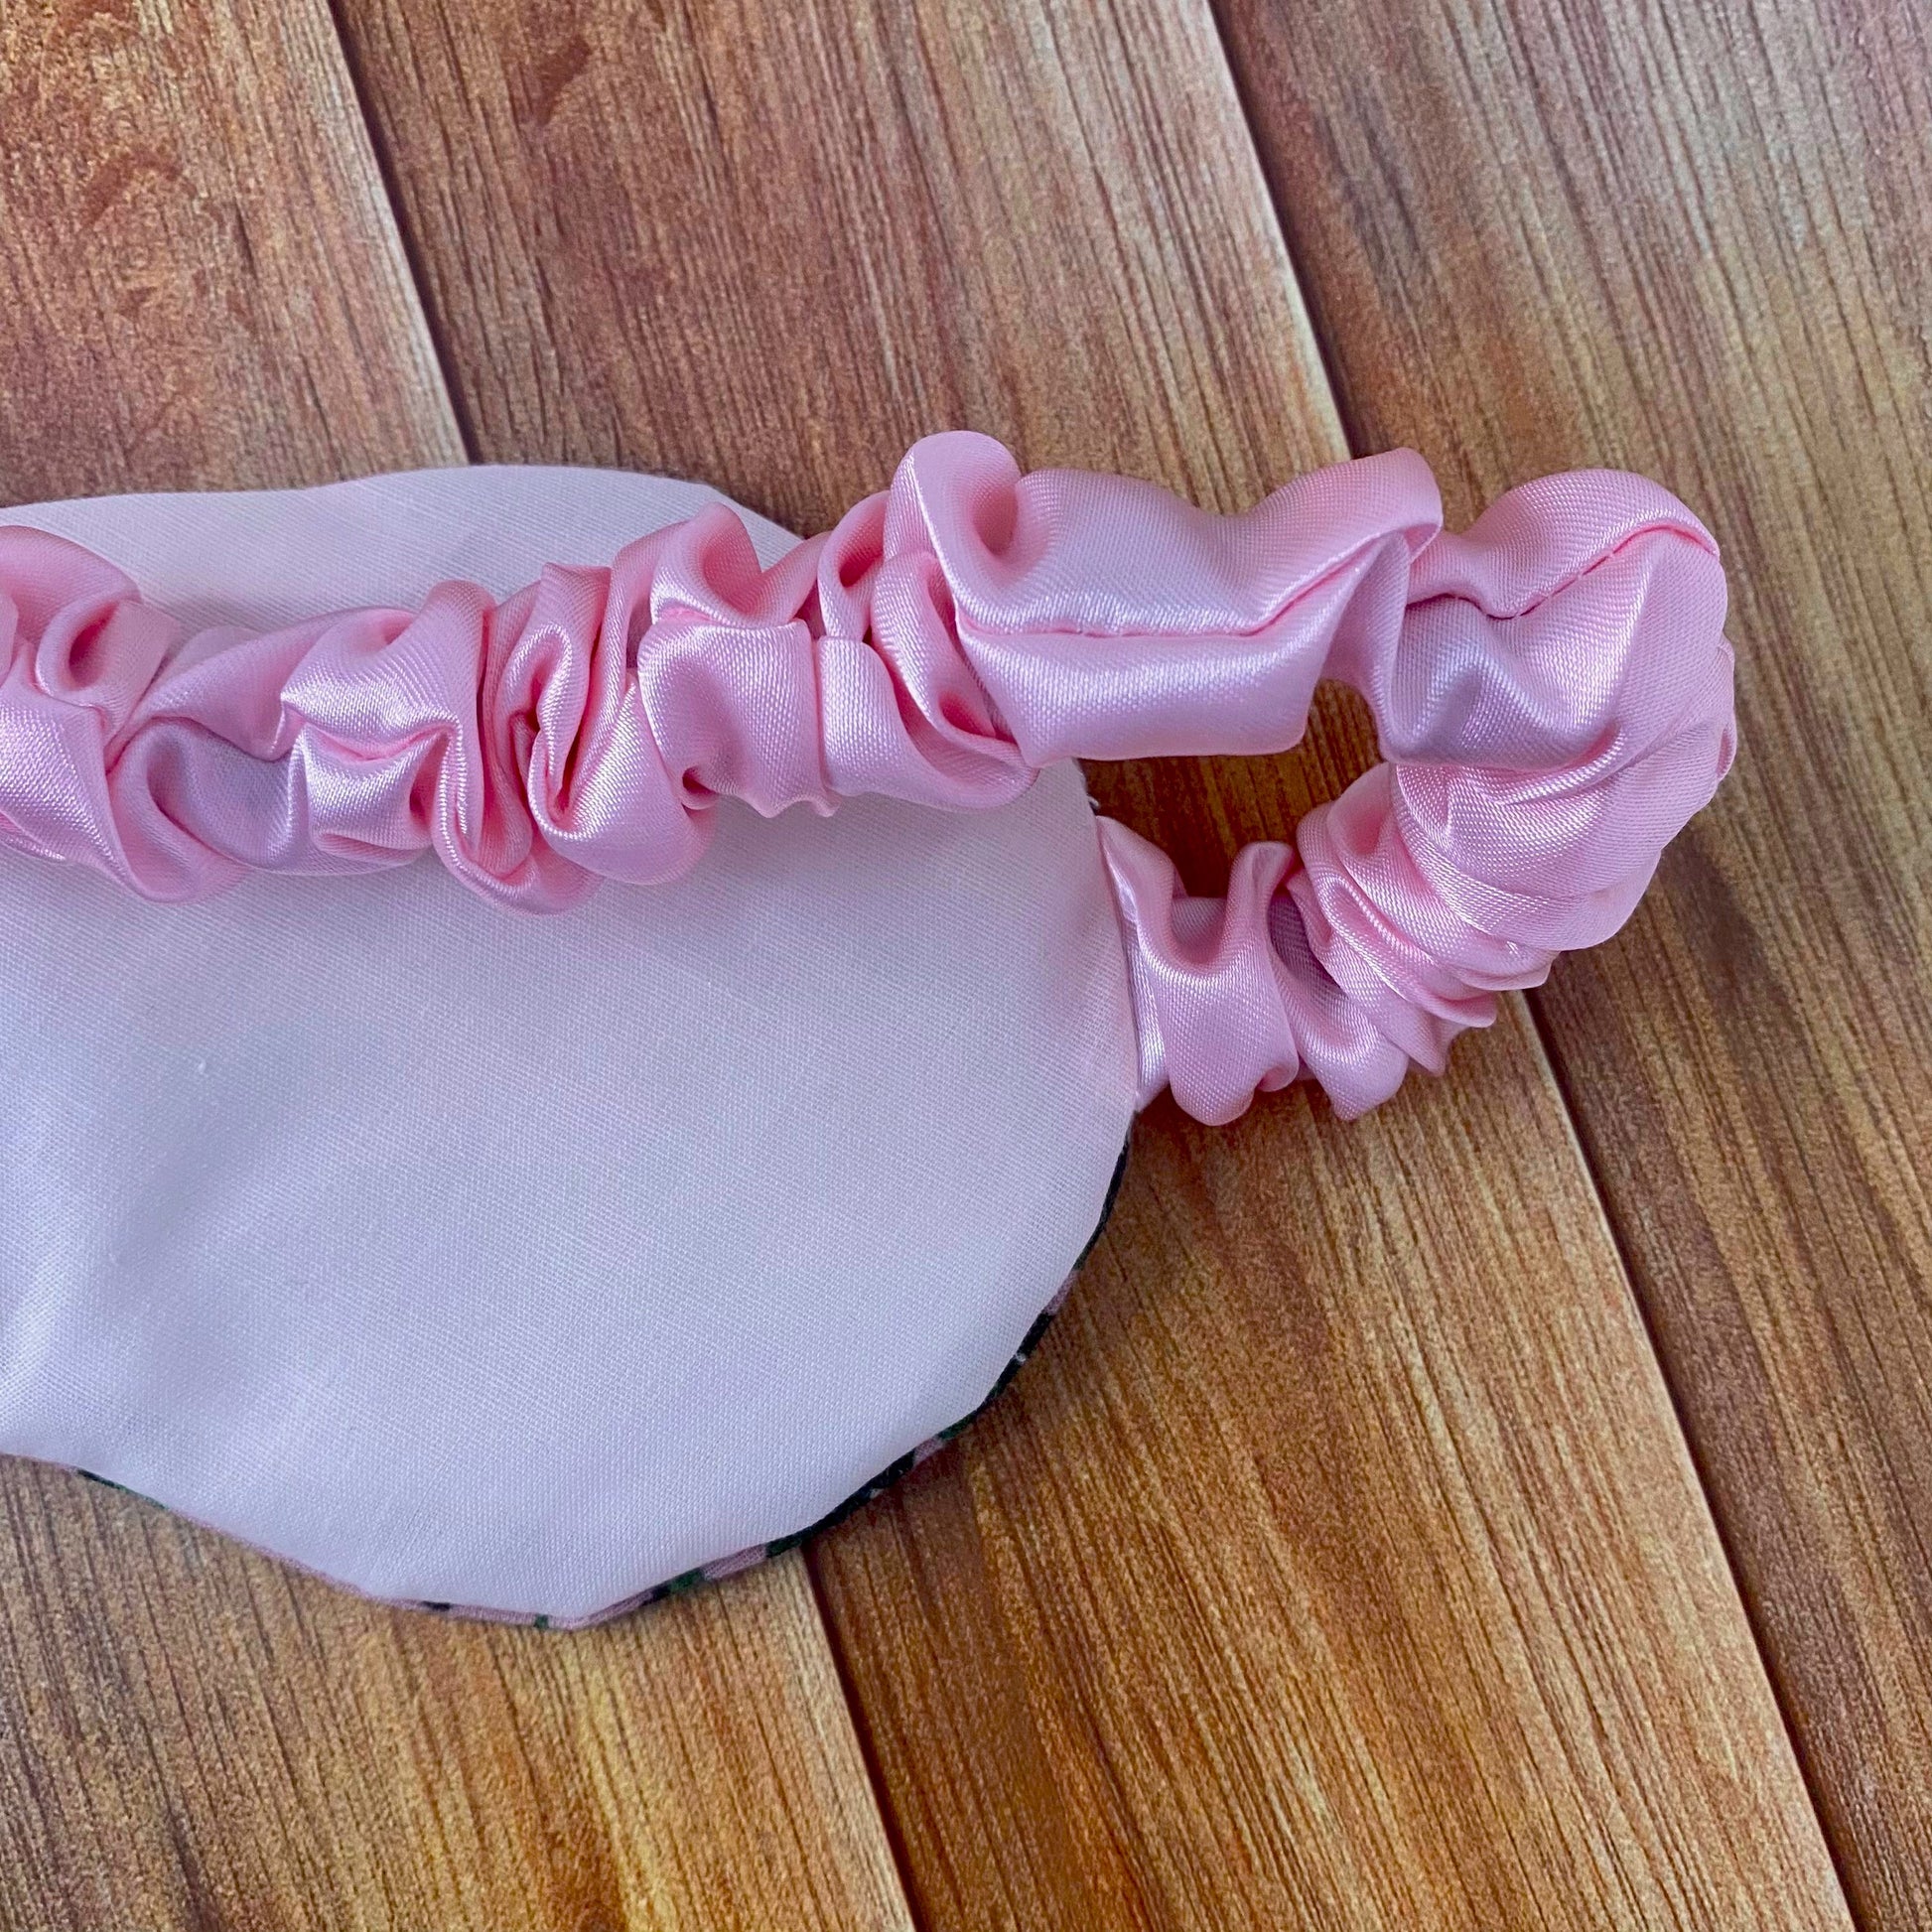 green foliage sleepmask back shown on a wooden background, showing pink backing and pink strap